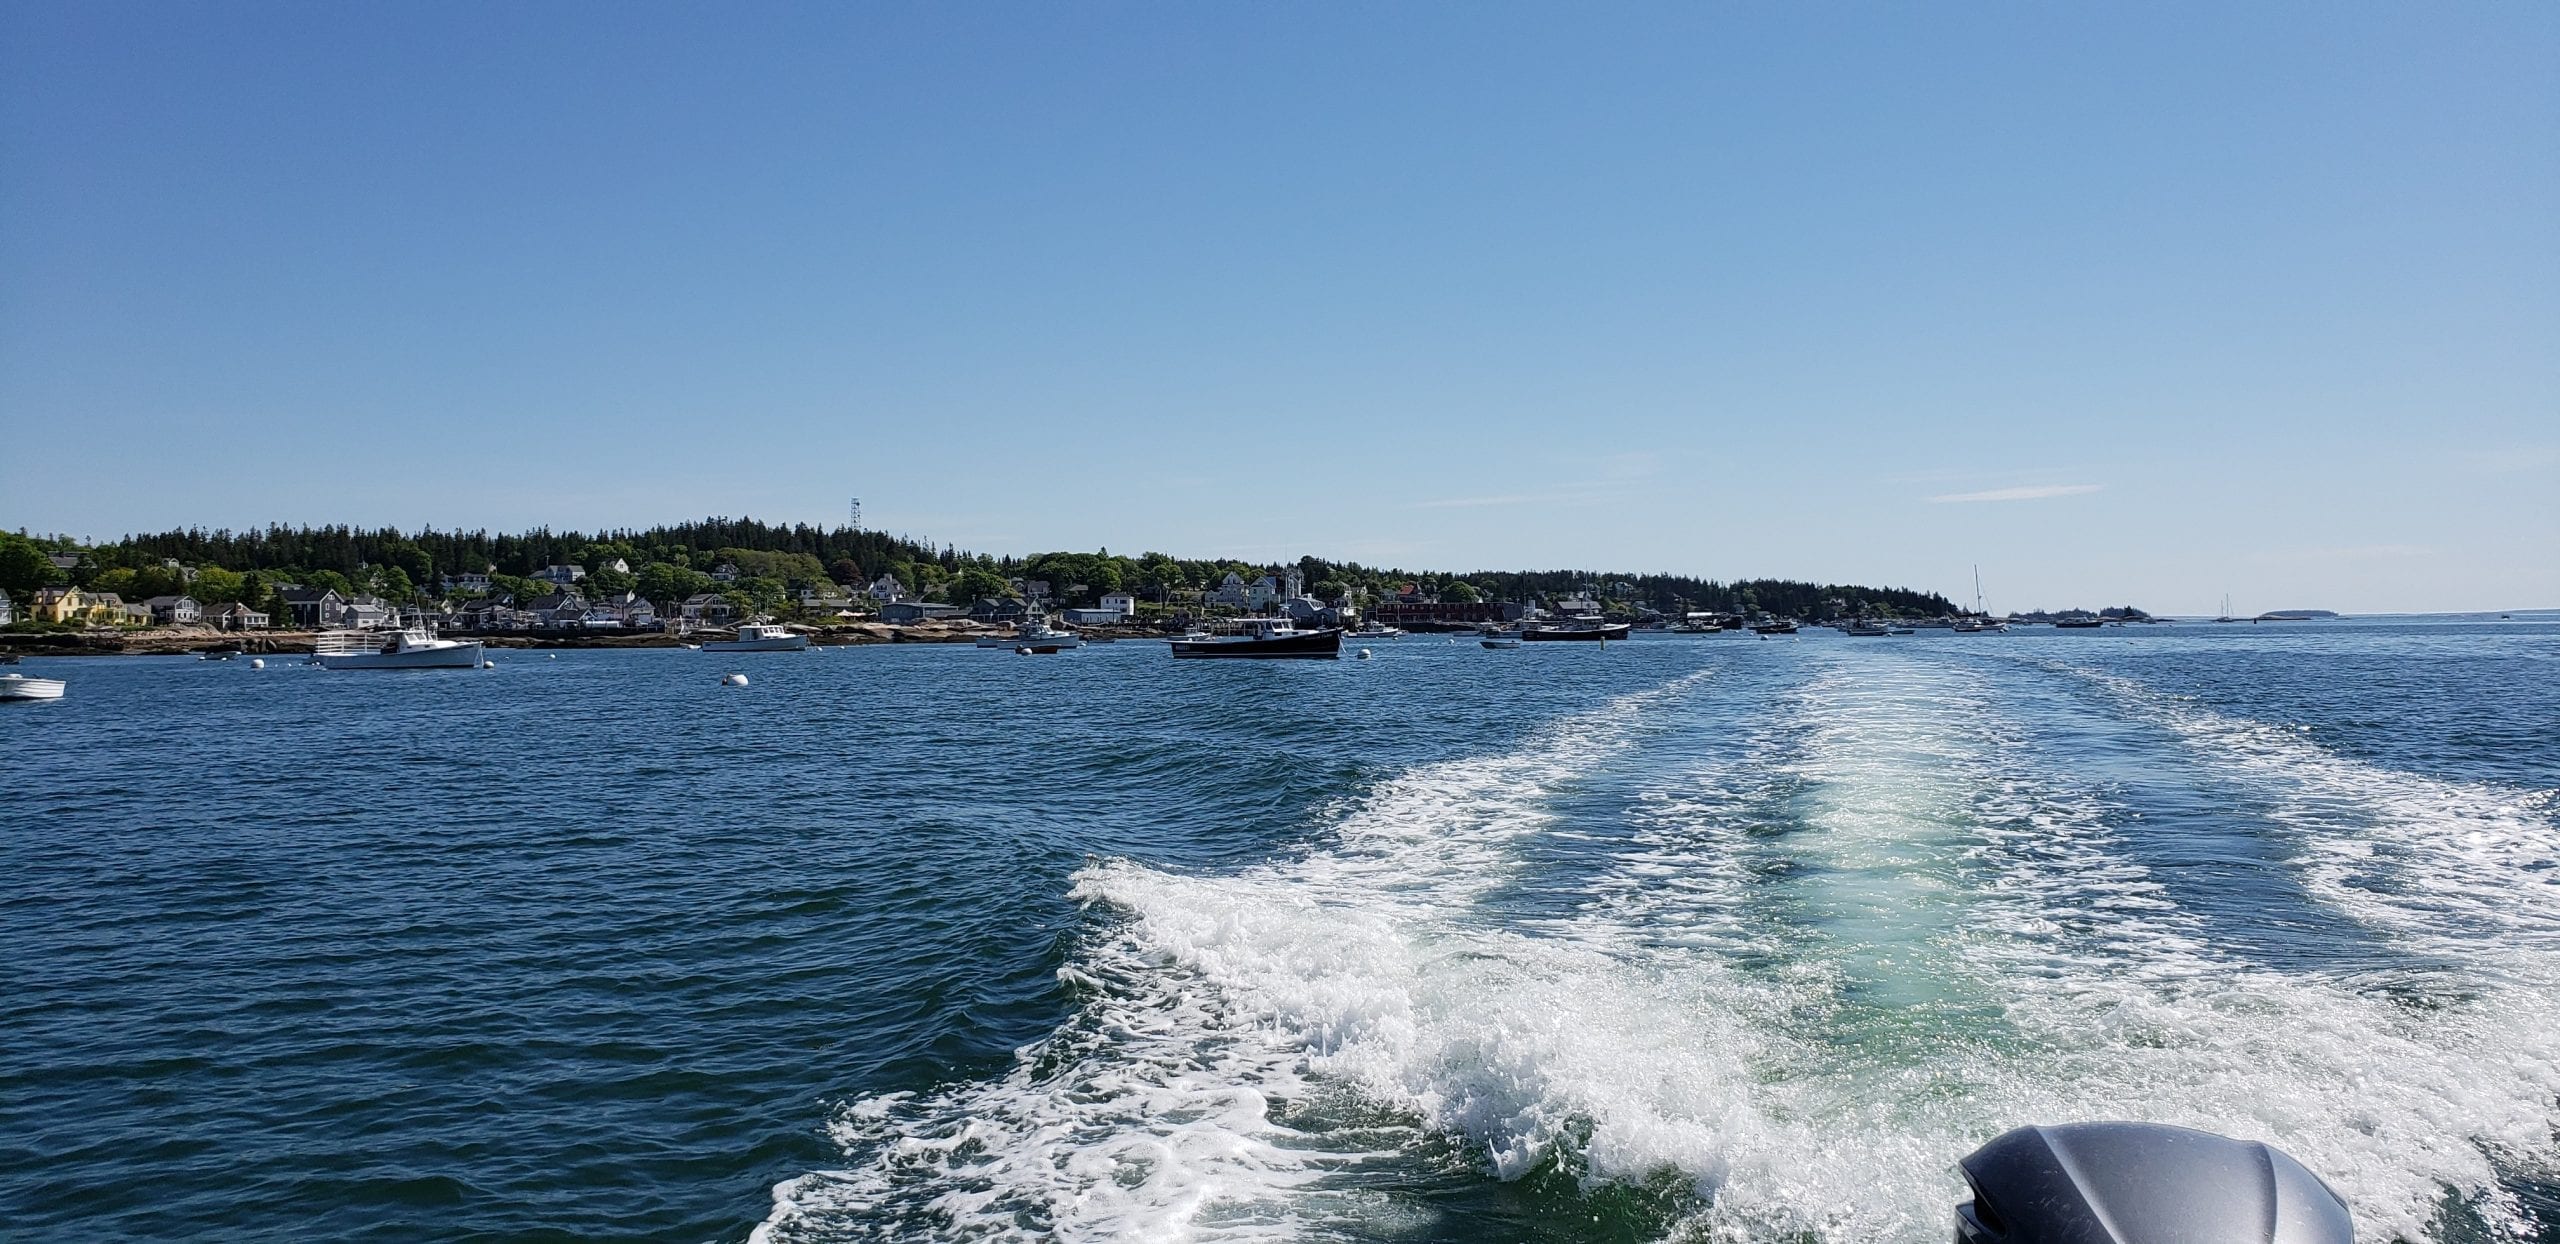 Maine 2019 Lobster Boat Races Schedule